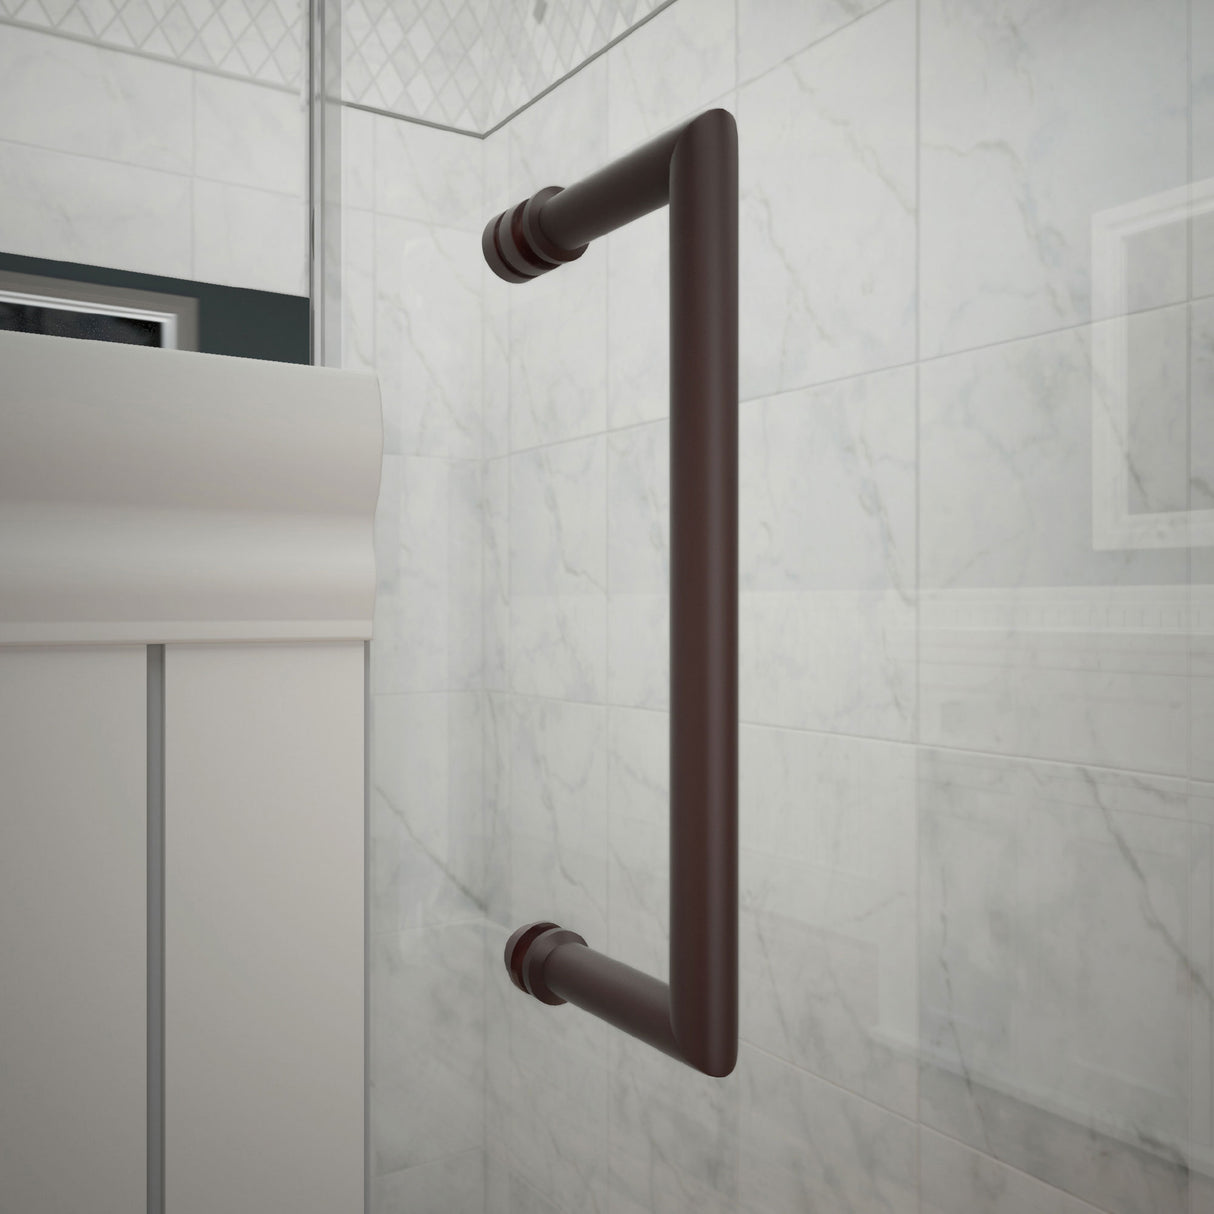 DreamLine Unidoor Plus 32 1/2 in. W x 30 3/8 in. D x 72 in. H Frameless Hinged Shower Enclosure in Oil Rubbed Bronze